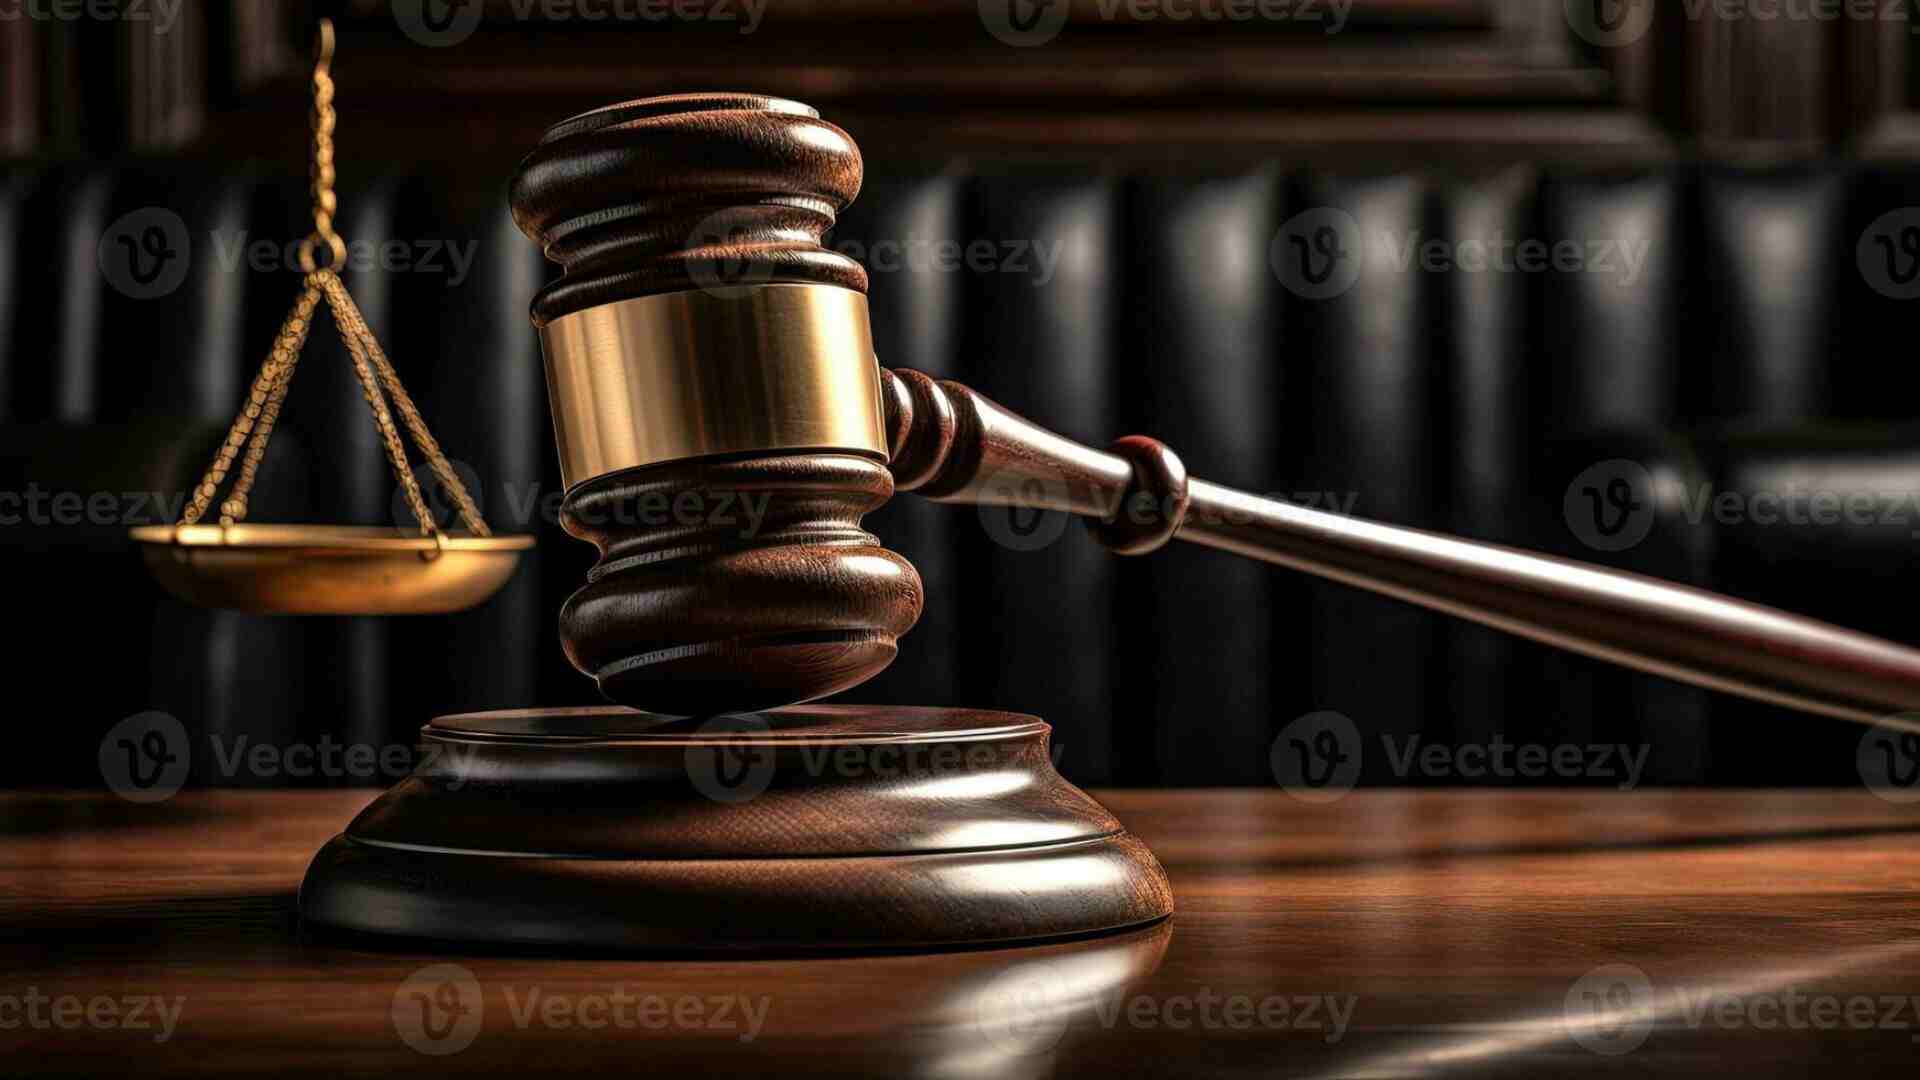 Pak: Peshawar HC Grants Bail To Two Accused In Child Sexual Assault Cases